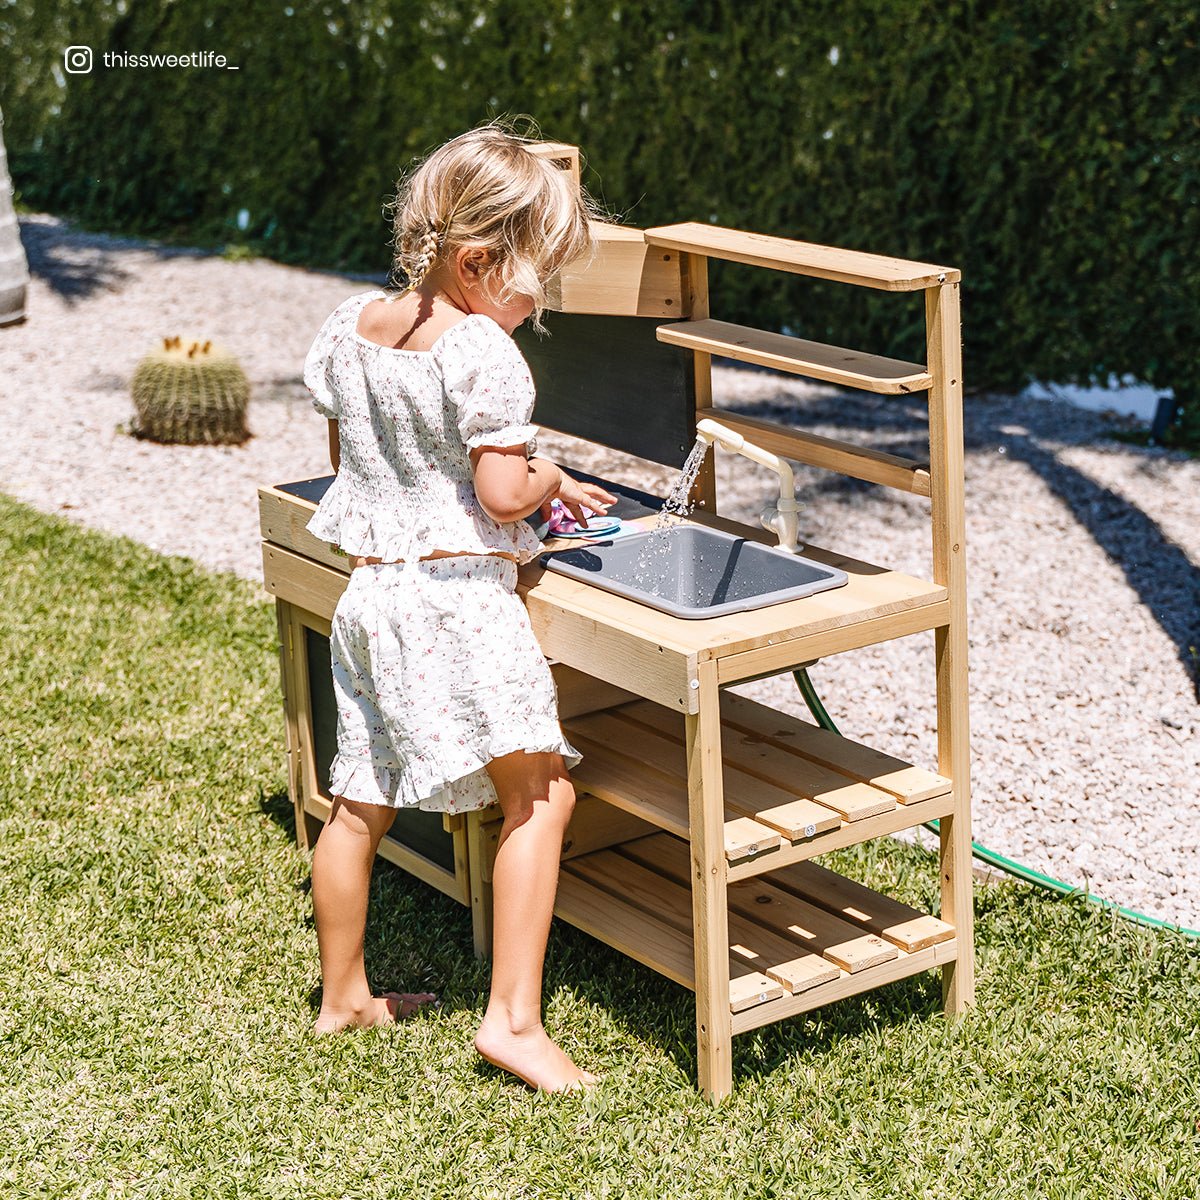 Get Ramsey Outdoor Play Kitchen: Where Kids Cook Up Imaginative Play